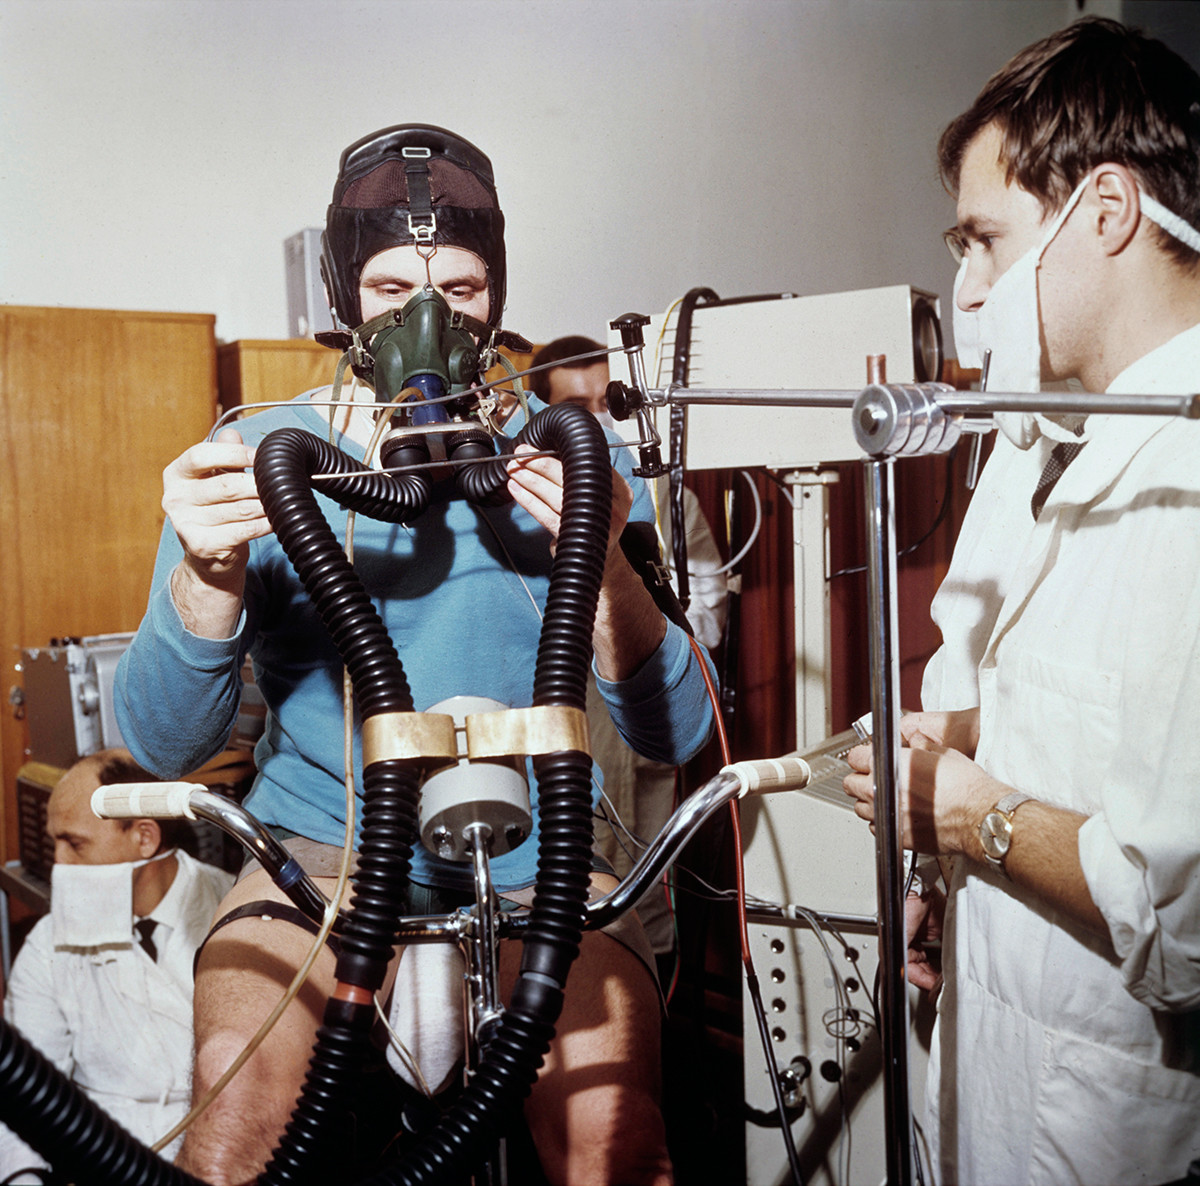 Test on the bicycle ergometer in 1968.